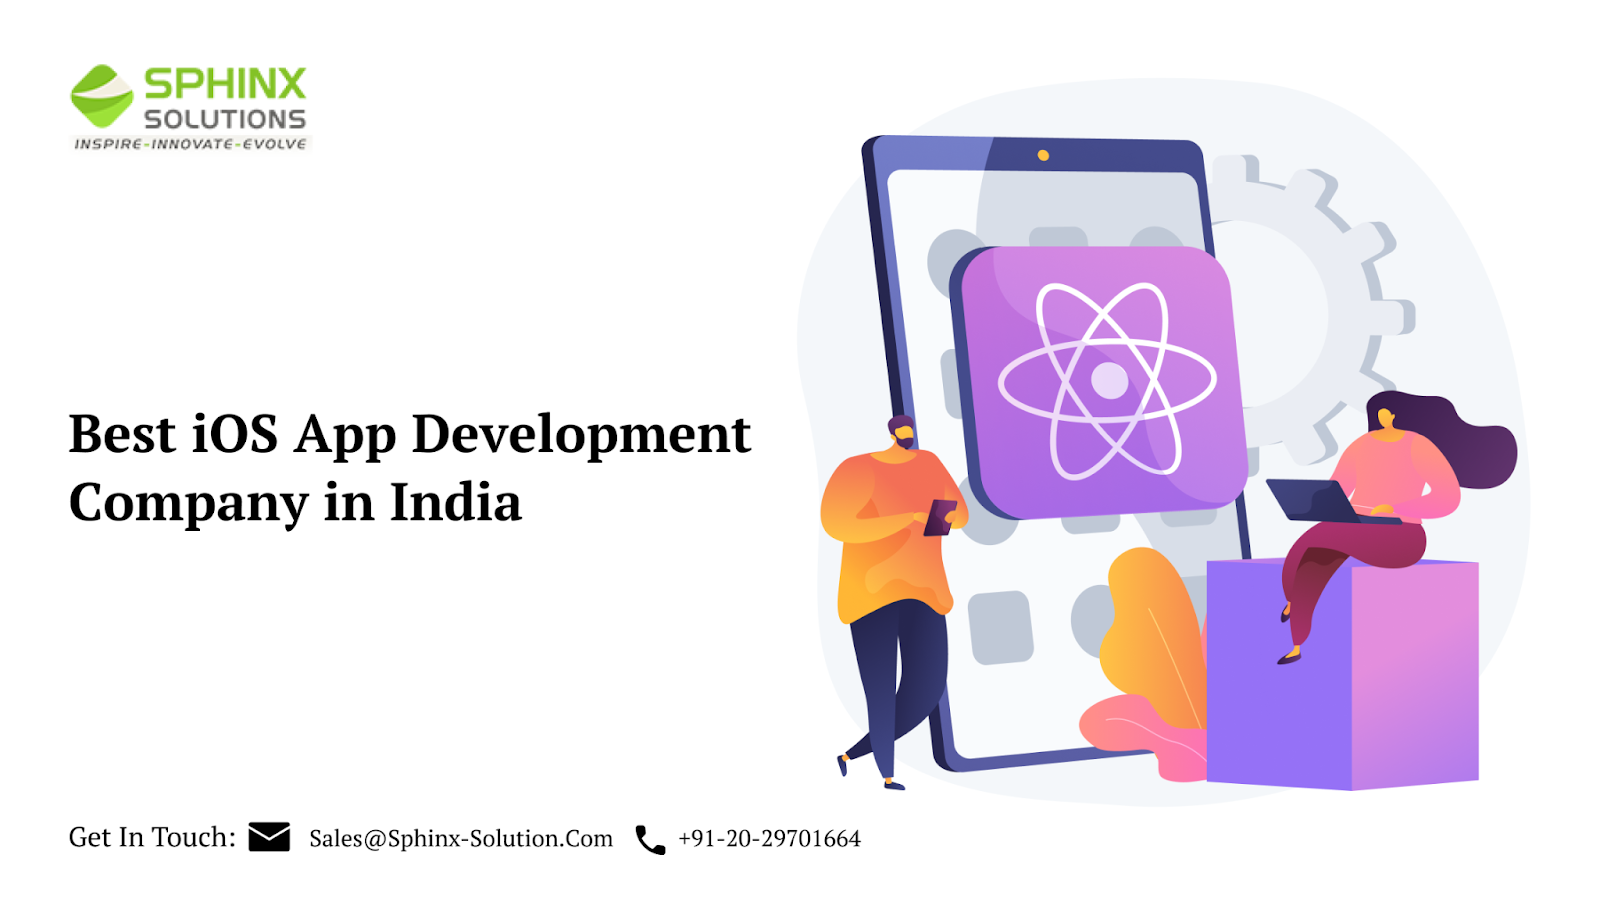 SPHINX

SOLUTIONS

INSPIRE - INNOVATE - EVOLVE

Best iOS App Development
Company in India

 

Get In Touch: Ng Sales@Sphinx-Solution.Com Rg +91-20-29701664